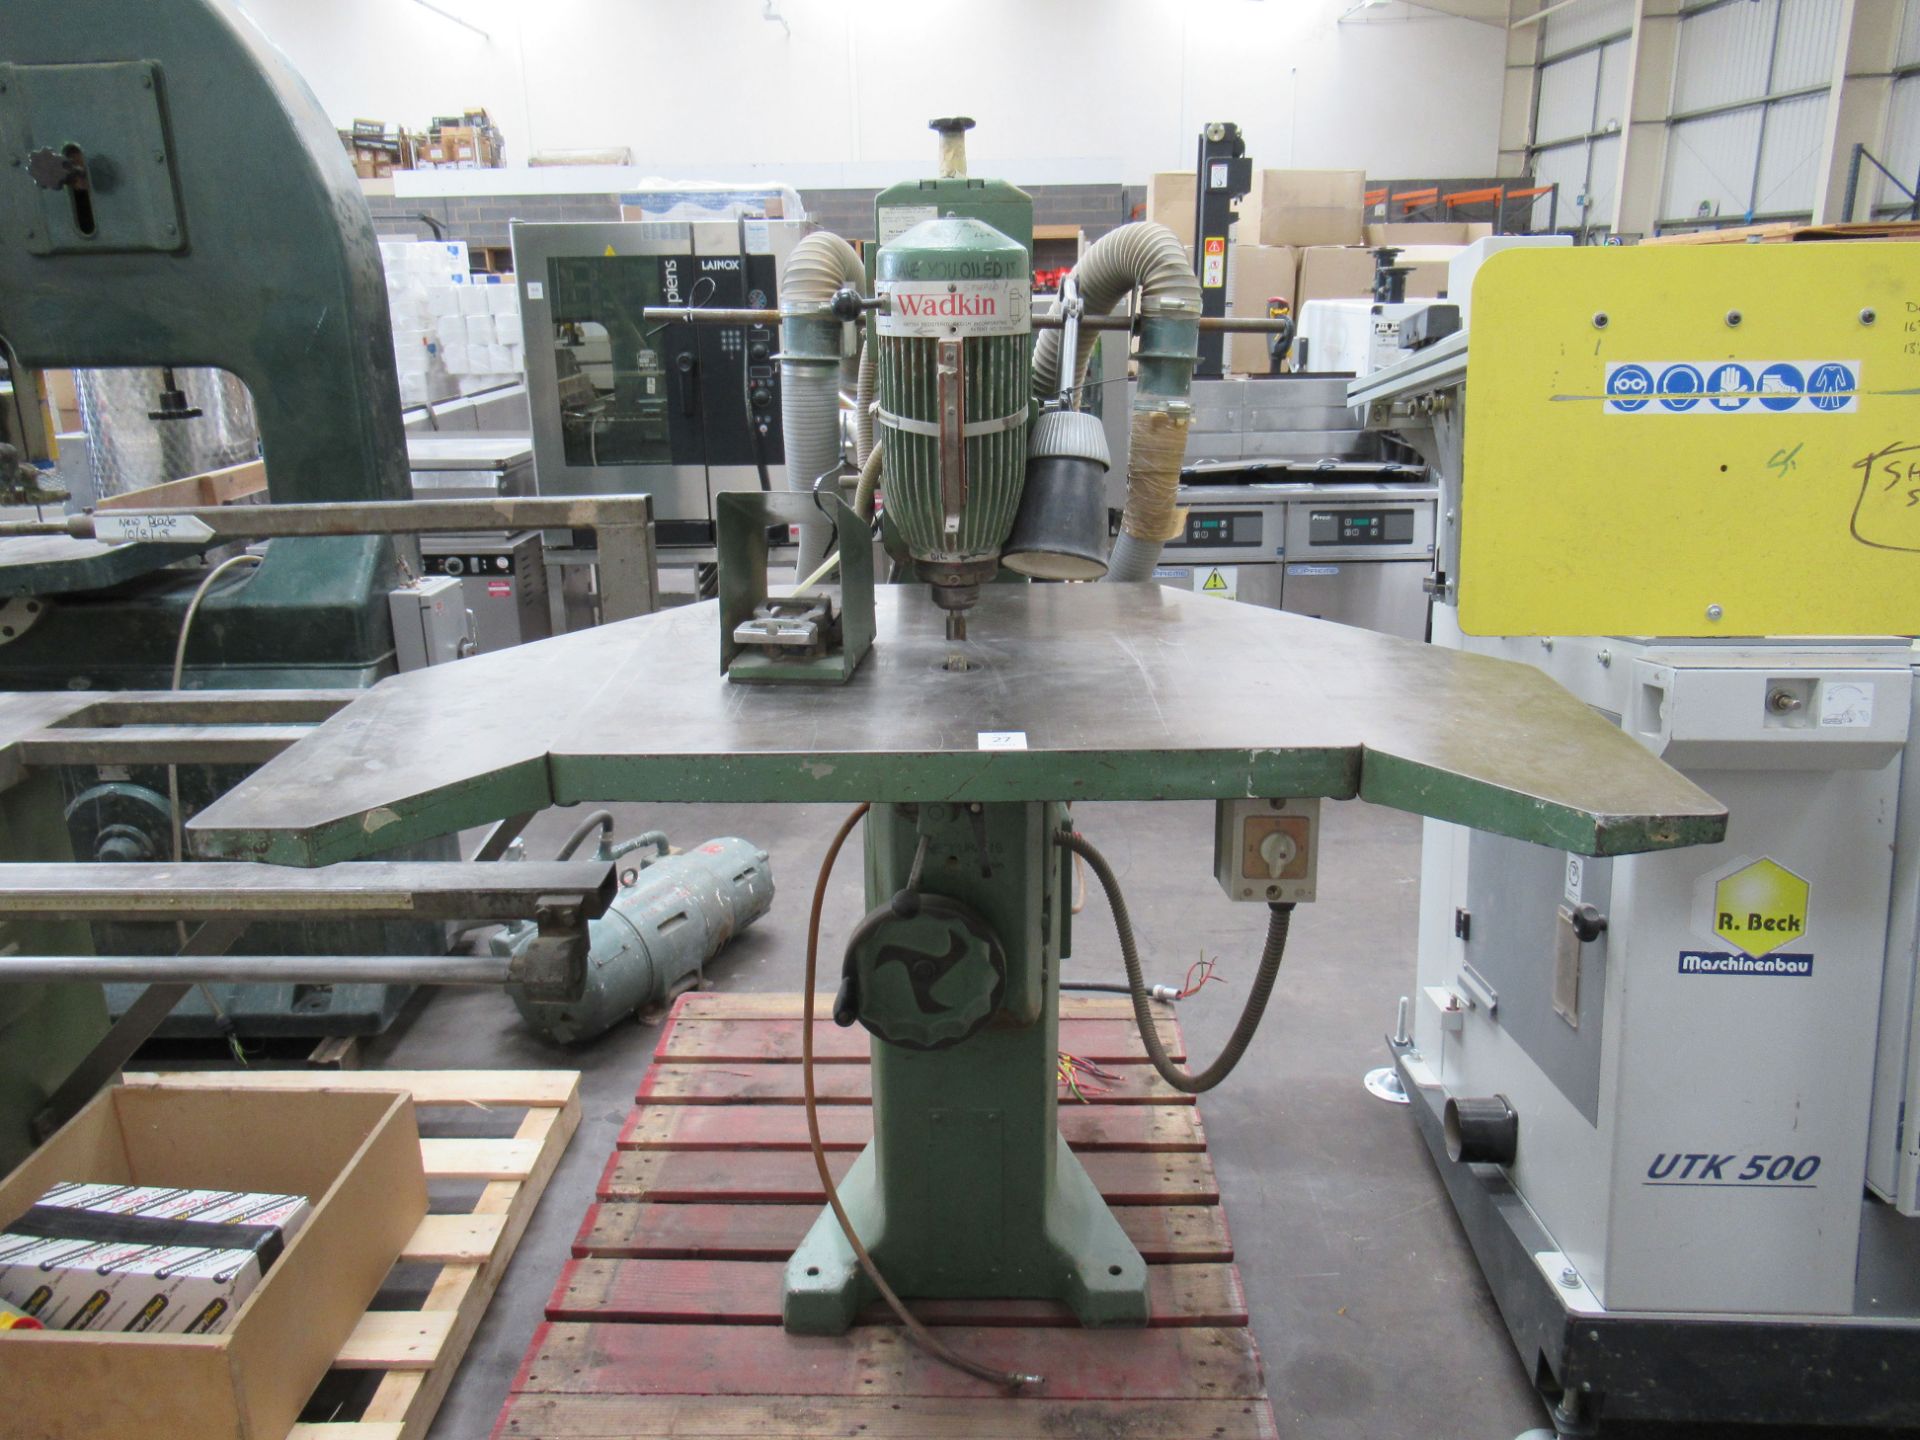 Wadkin Pedal Operated Overhead Router - 3ph.